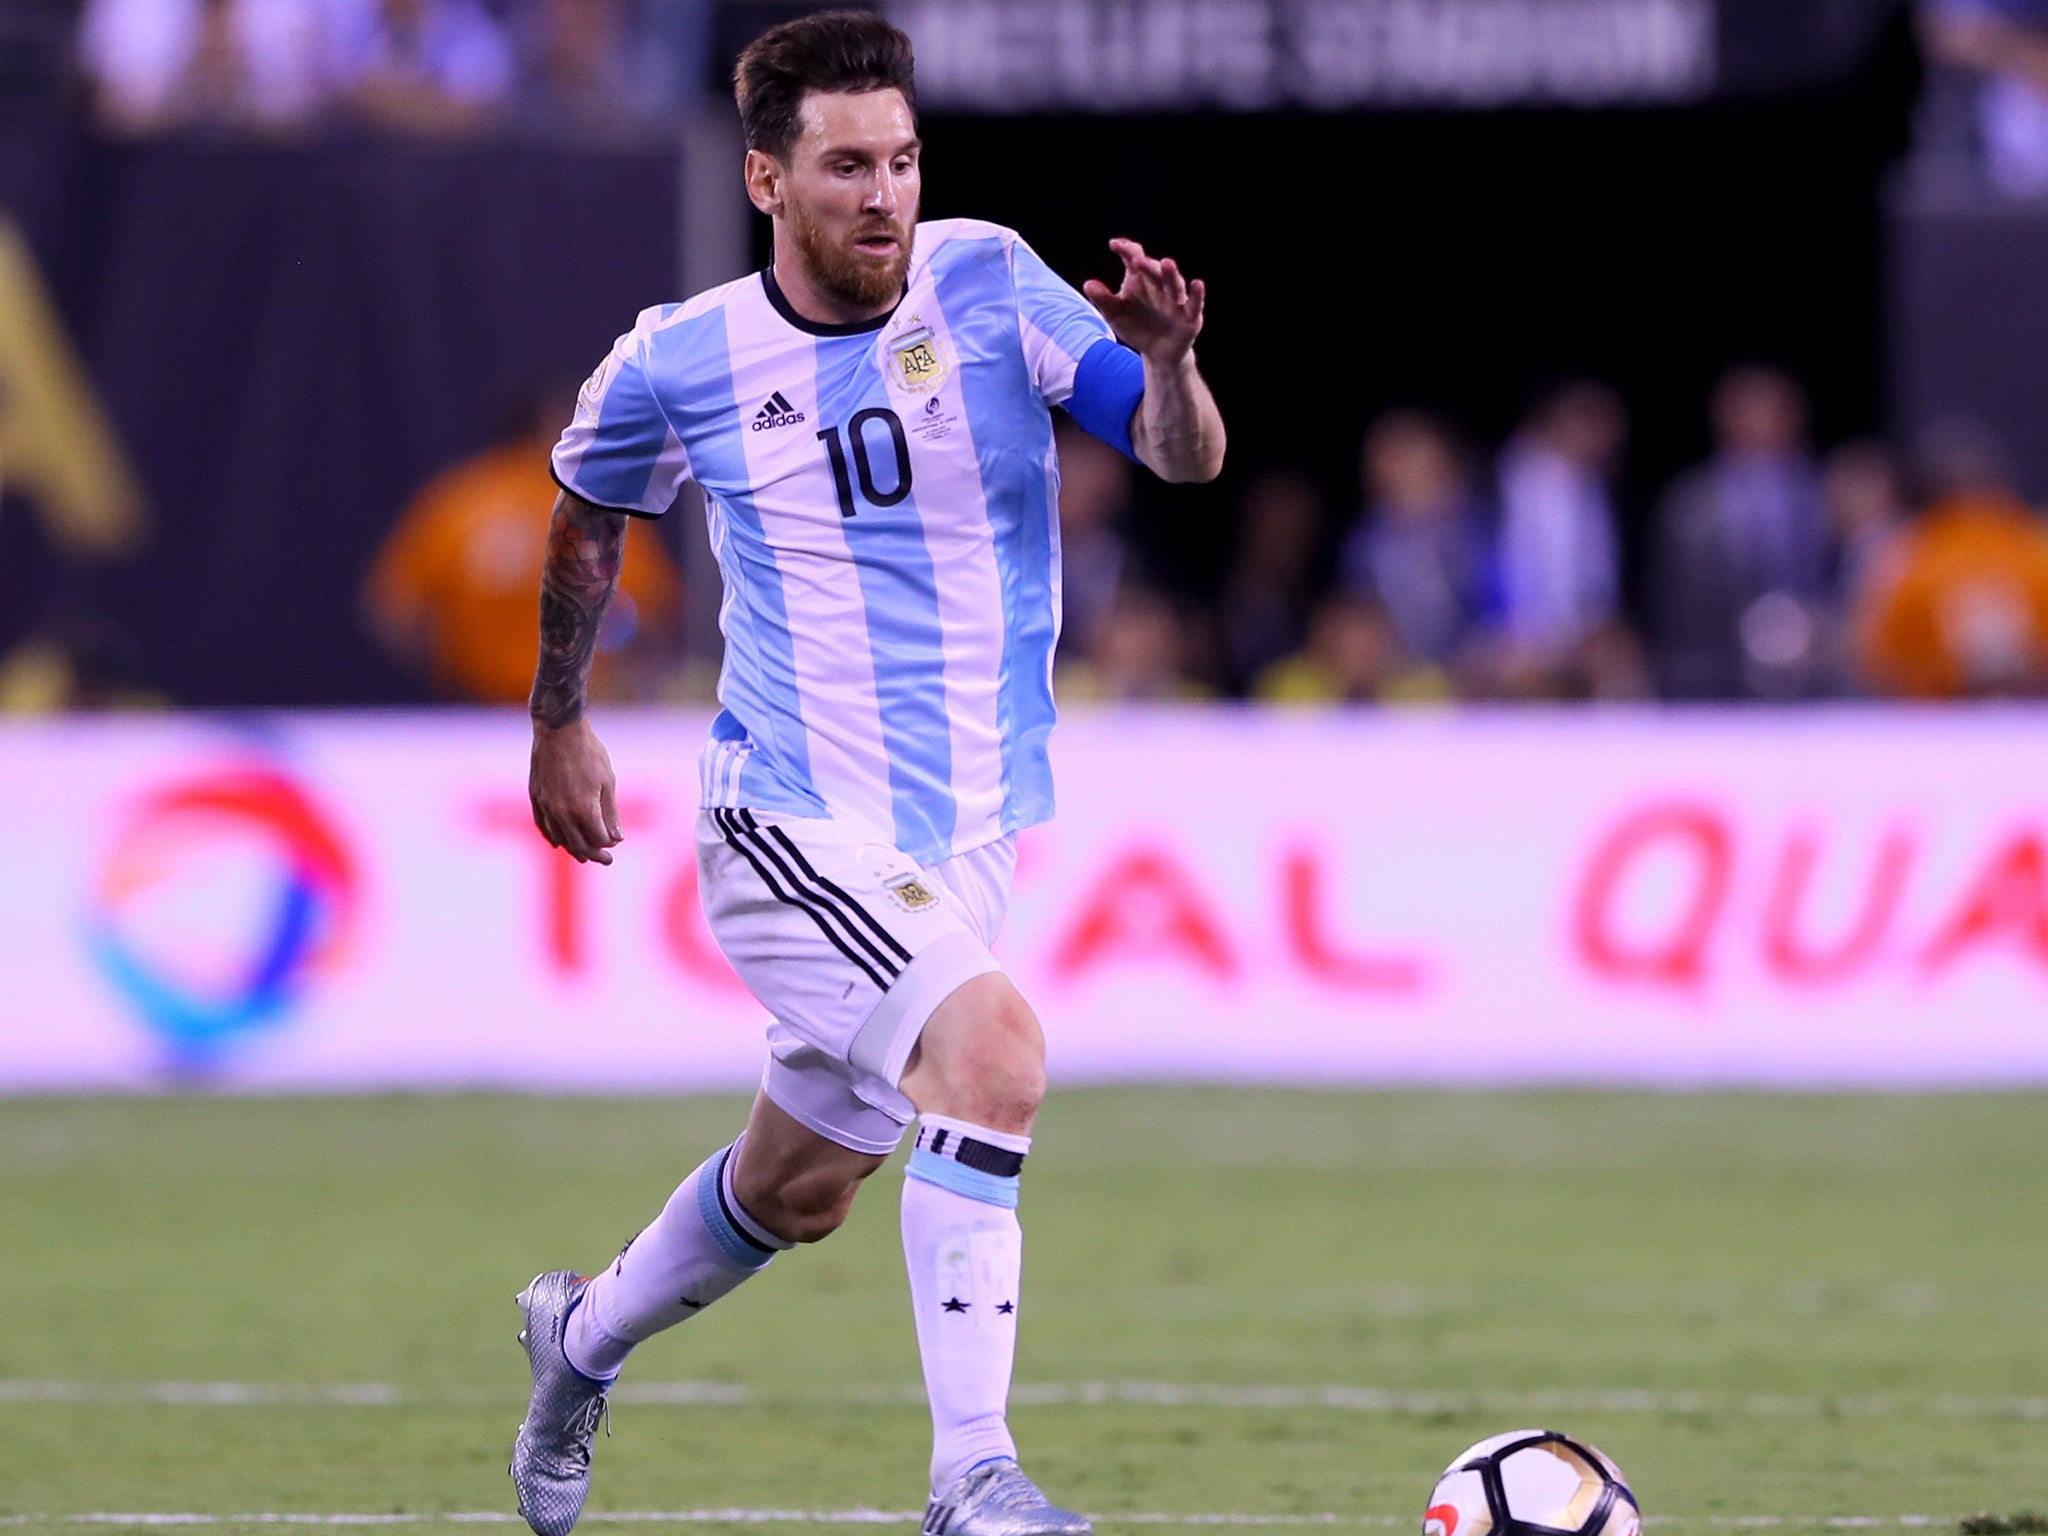 Diego Maradona has urged fans to leave Lionel Messi alone after he decided to retire from international football